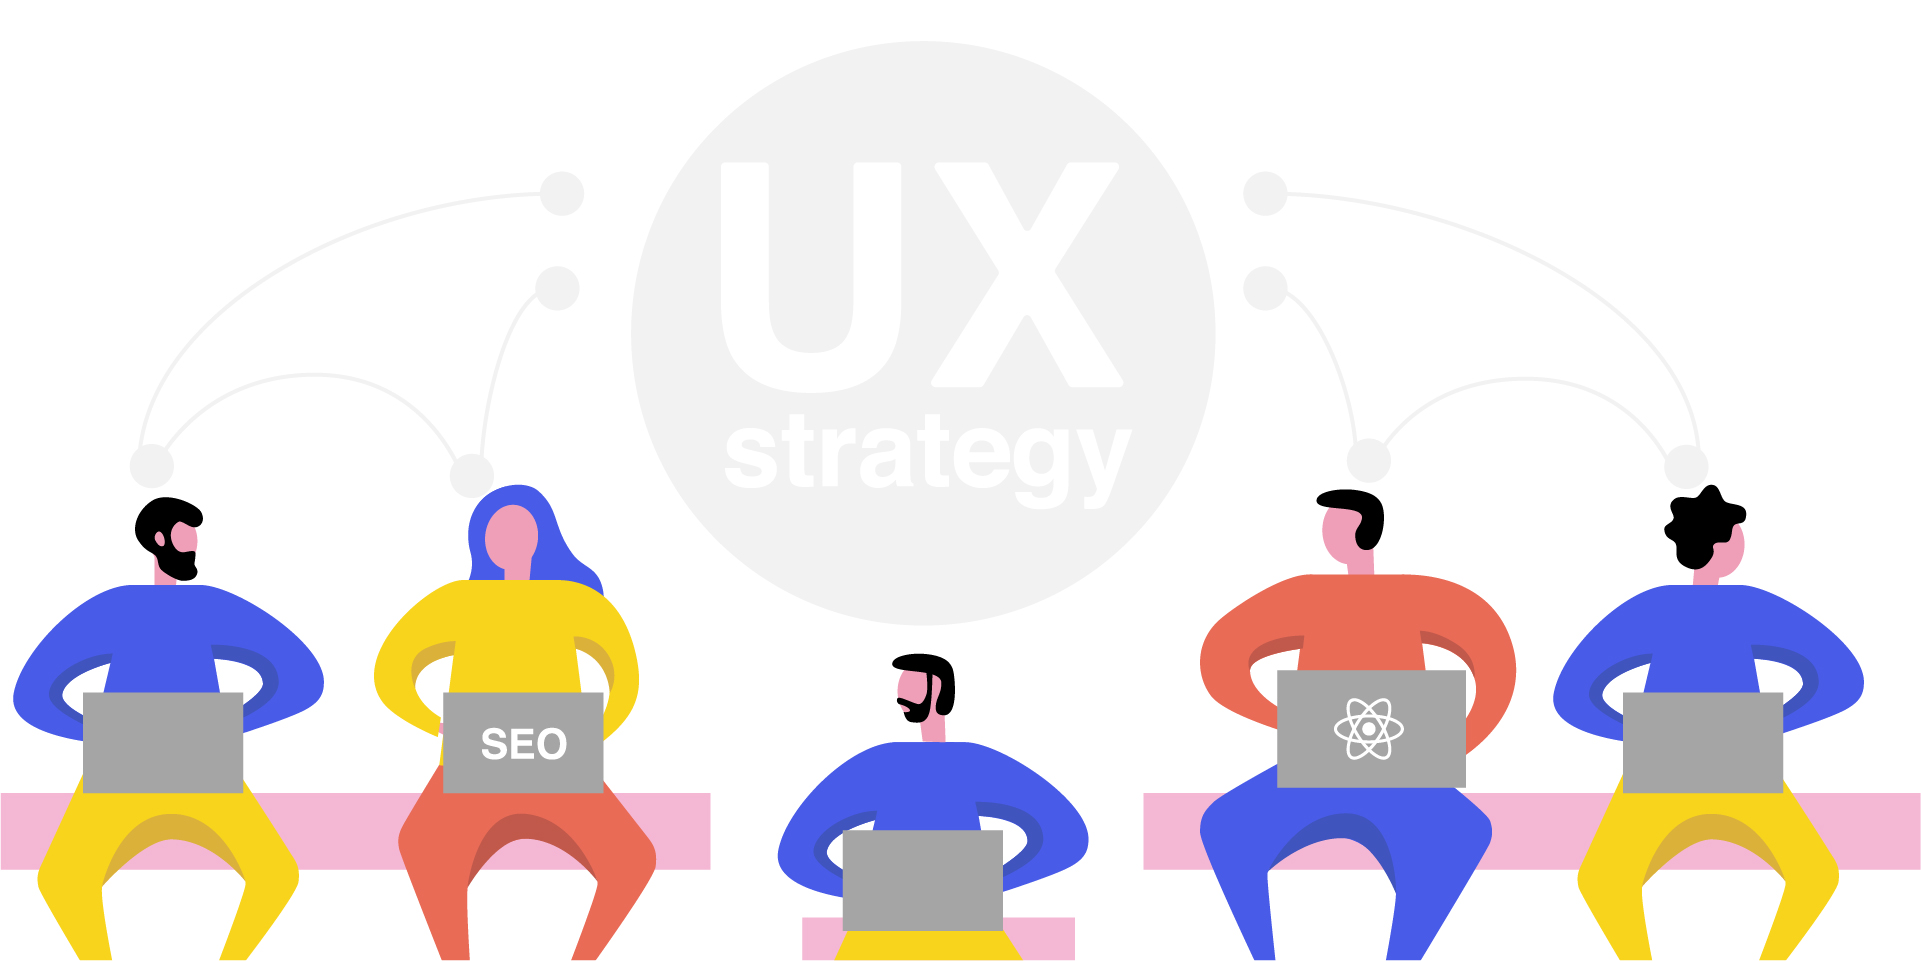 How to communicate the UX strategy to your team - Qubstudio